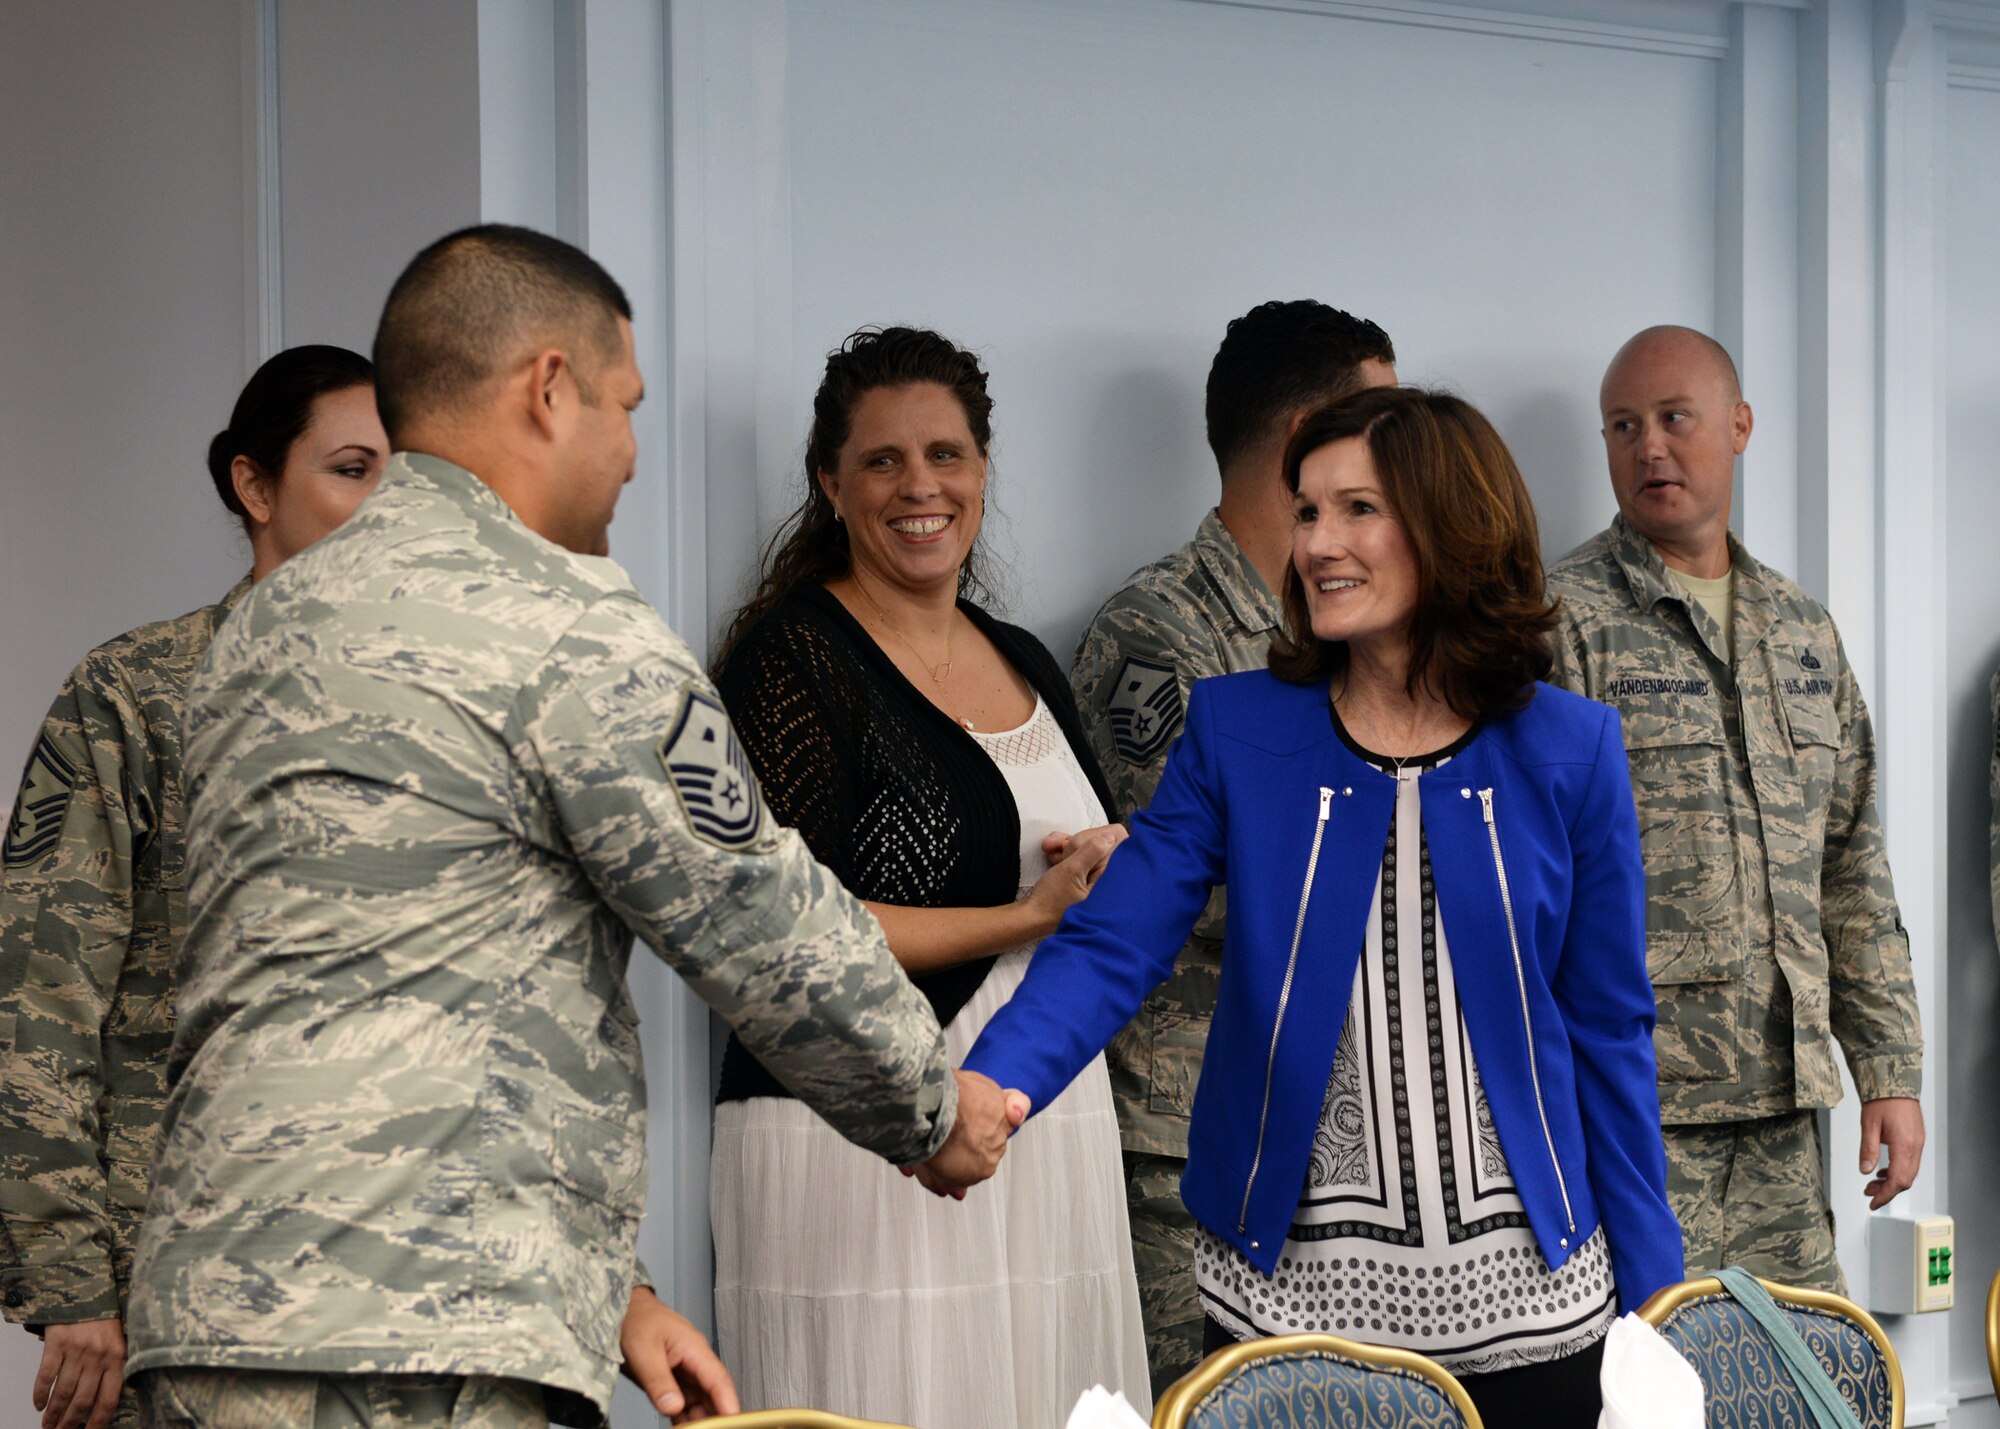 Betty Welsh, spouse of Air Force Chief of Staff Gen. Mark A. Welsh III, greets base leaders and spouses during a luncheon Jan. 21, 2016, at Andersen Air Force Base, Guam. Accompanying her husband on his visit to Andersen, Betty discussed the challenges spouses face and thanked them for supporting their partners. (U.S. Air Force photo/Senior Airman Cierra Presentado)